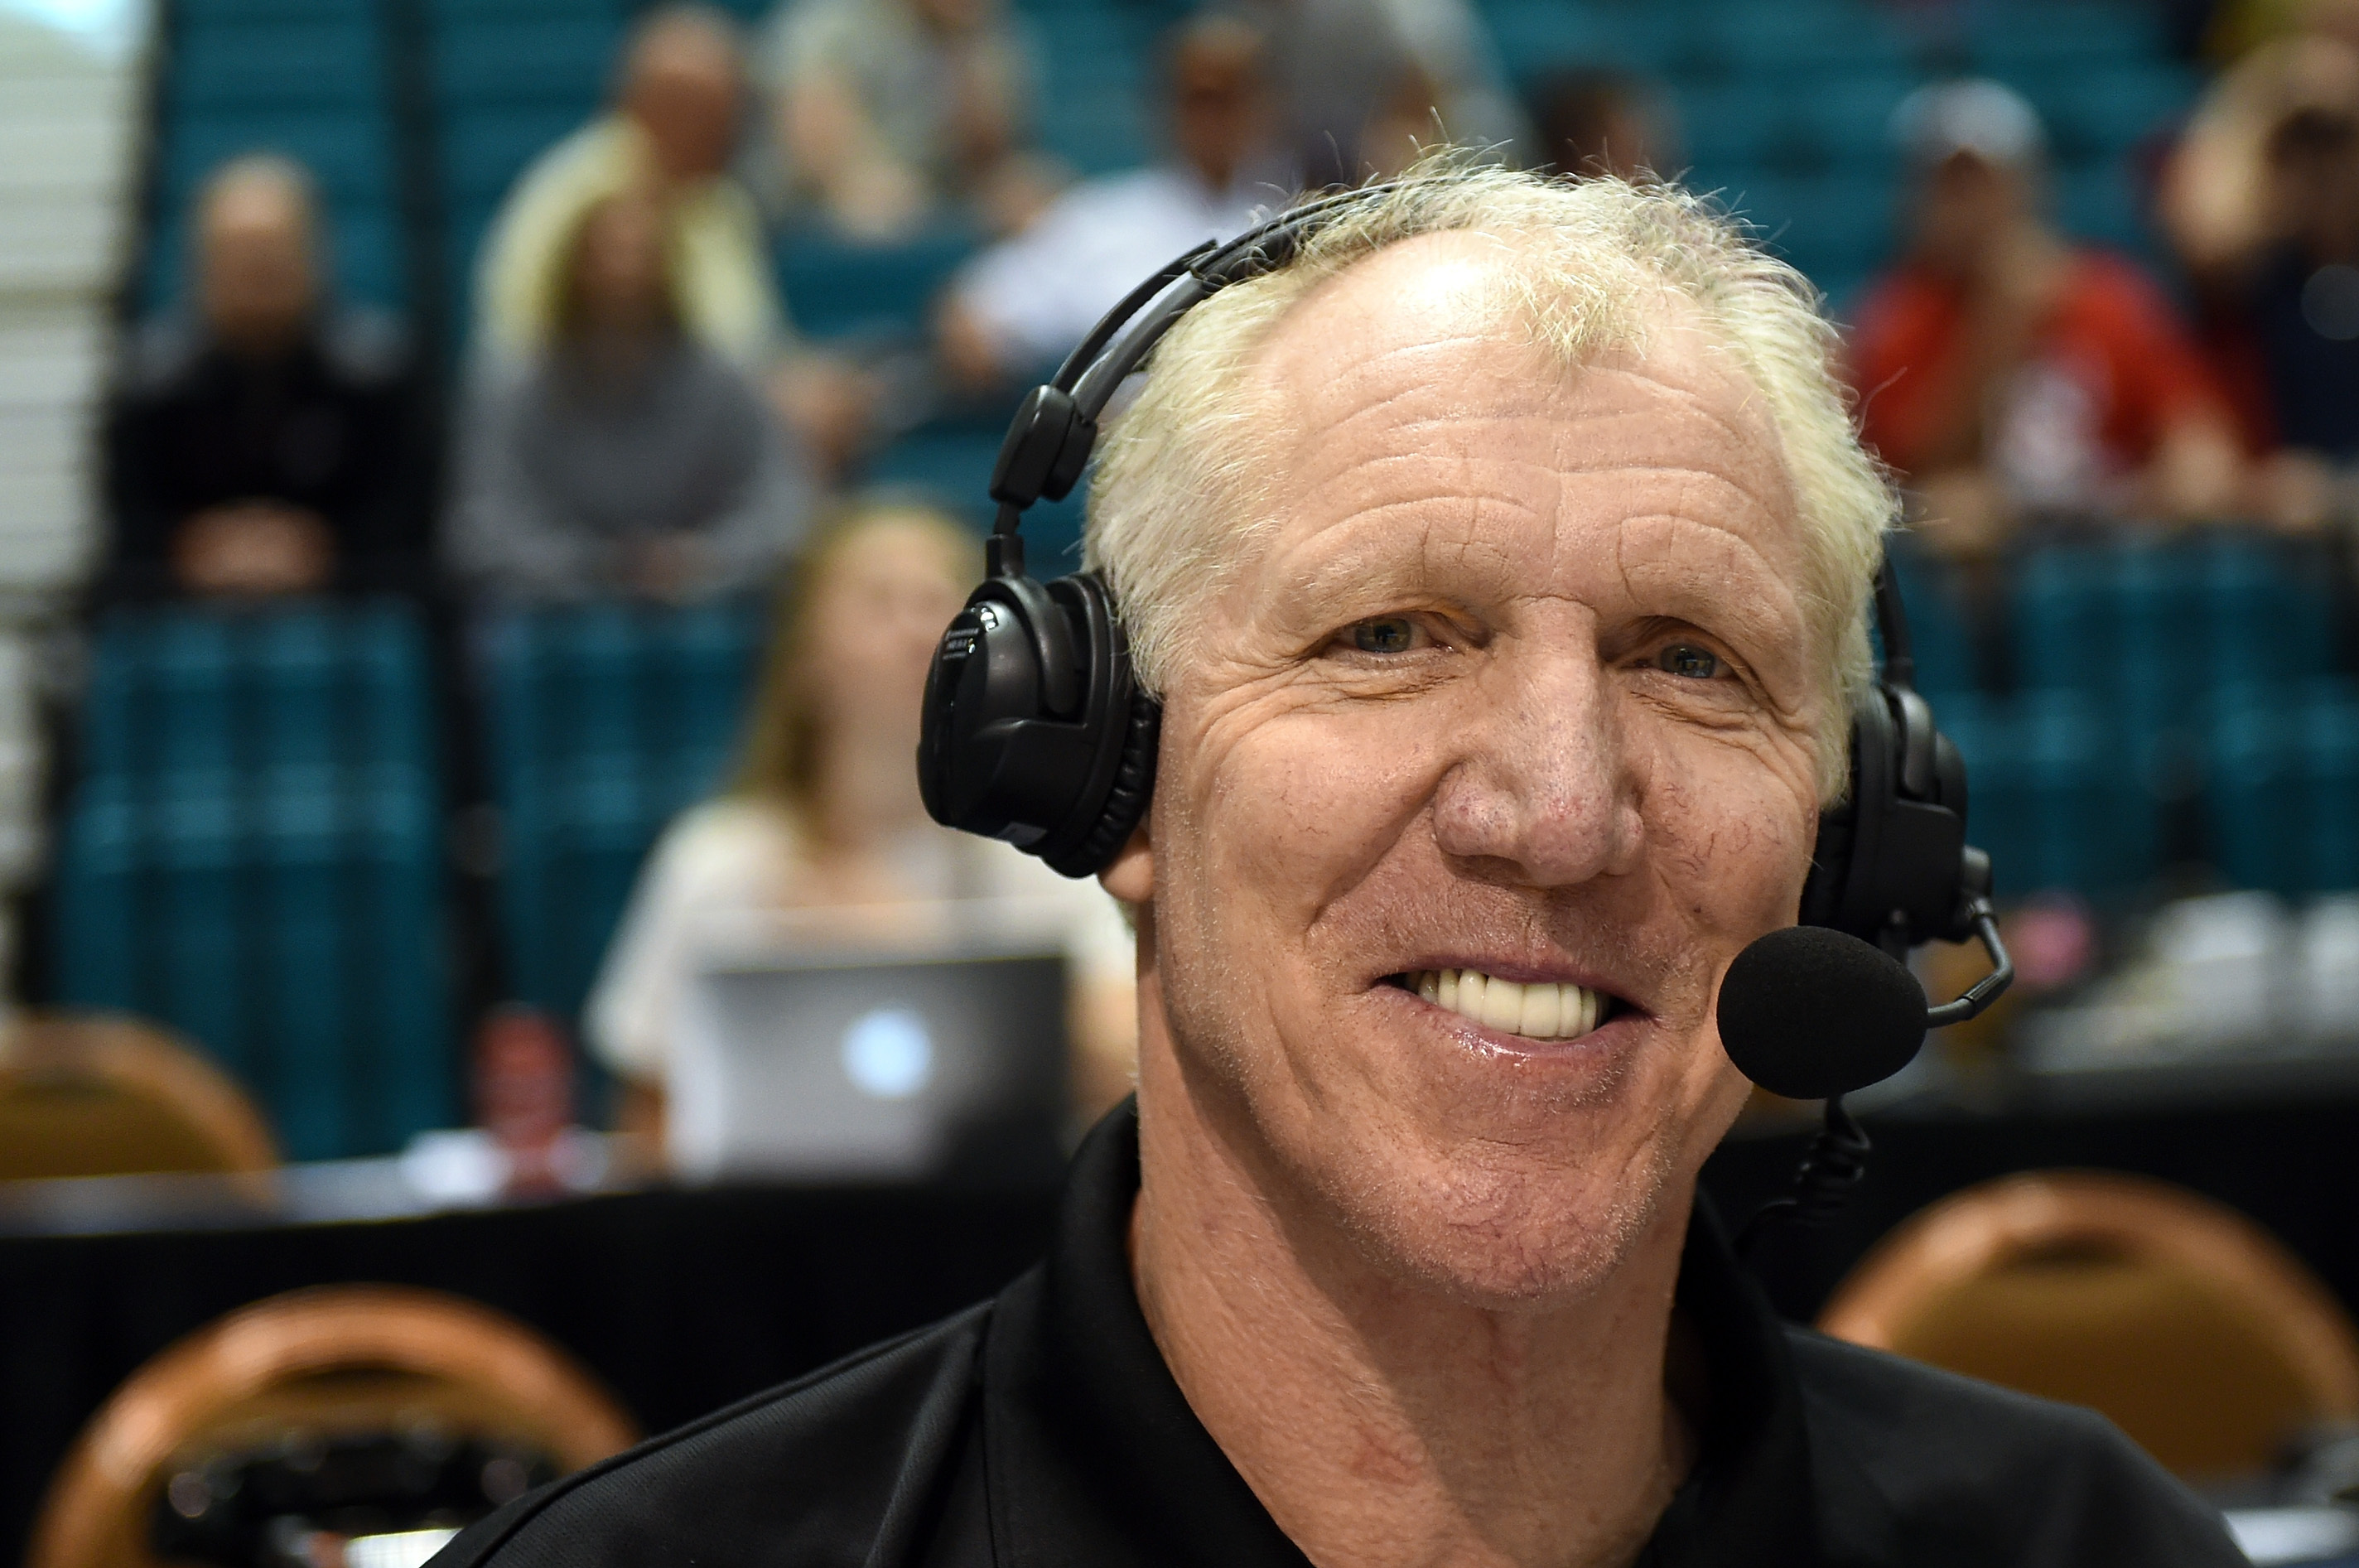 NBA's Bill Walton reveals he contemplated suicide after being fired by ESPN